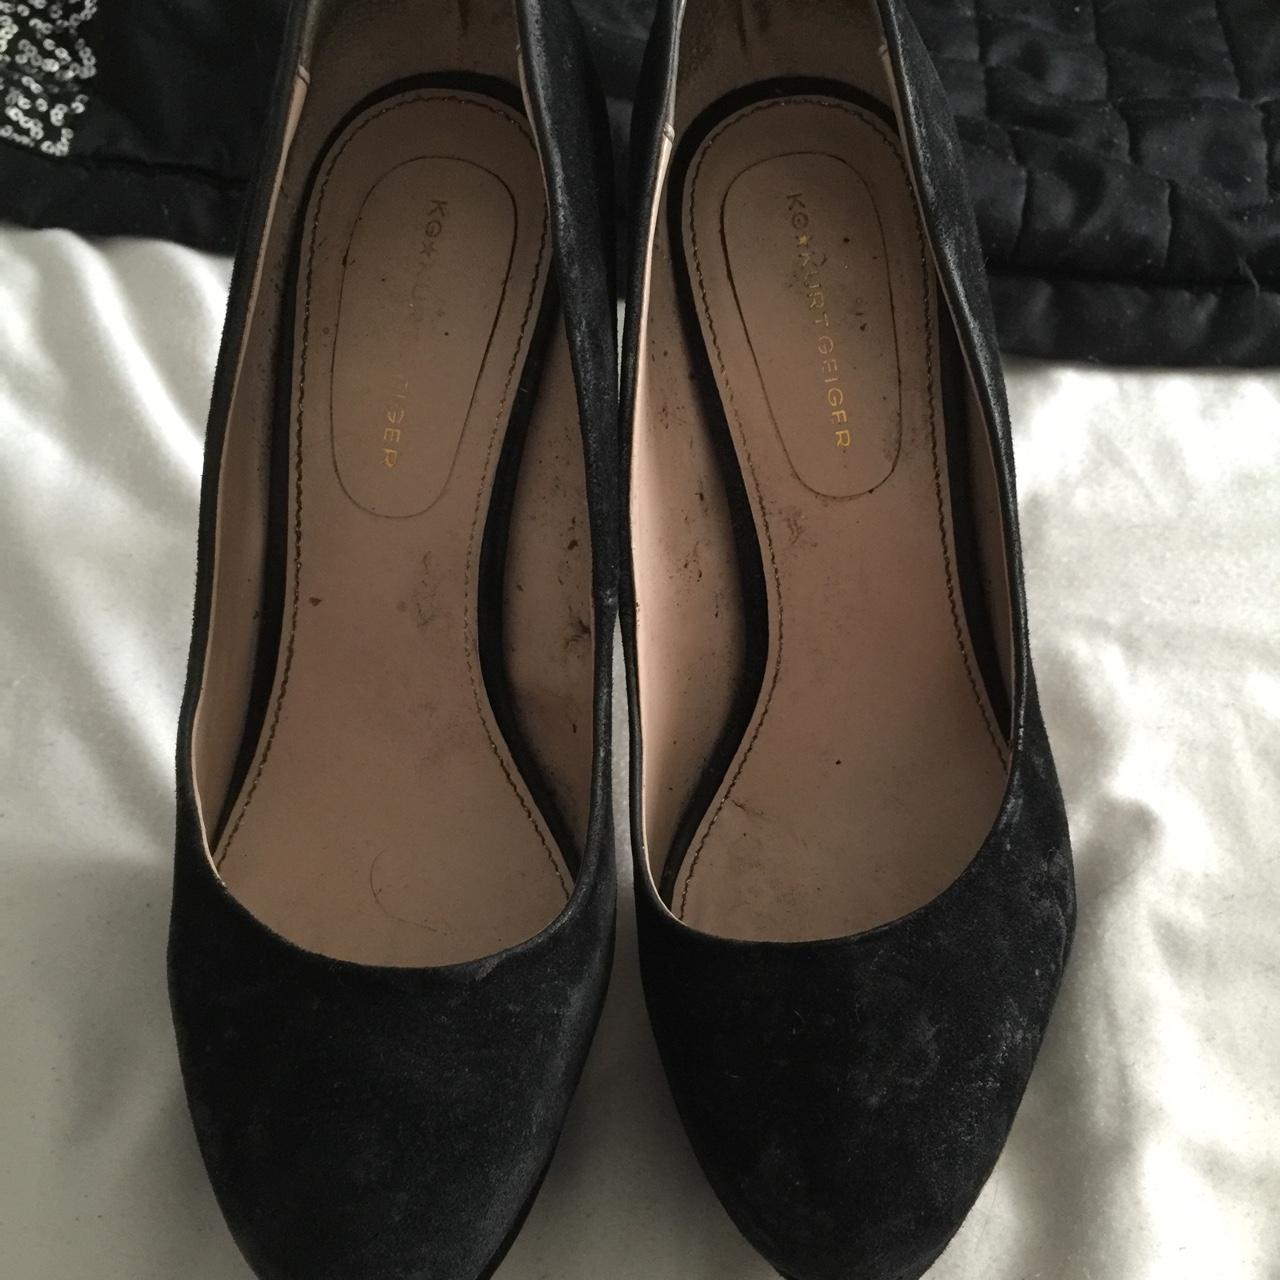 Kurt Geiger high suede court shoes - REAL ( on the... - Depop